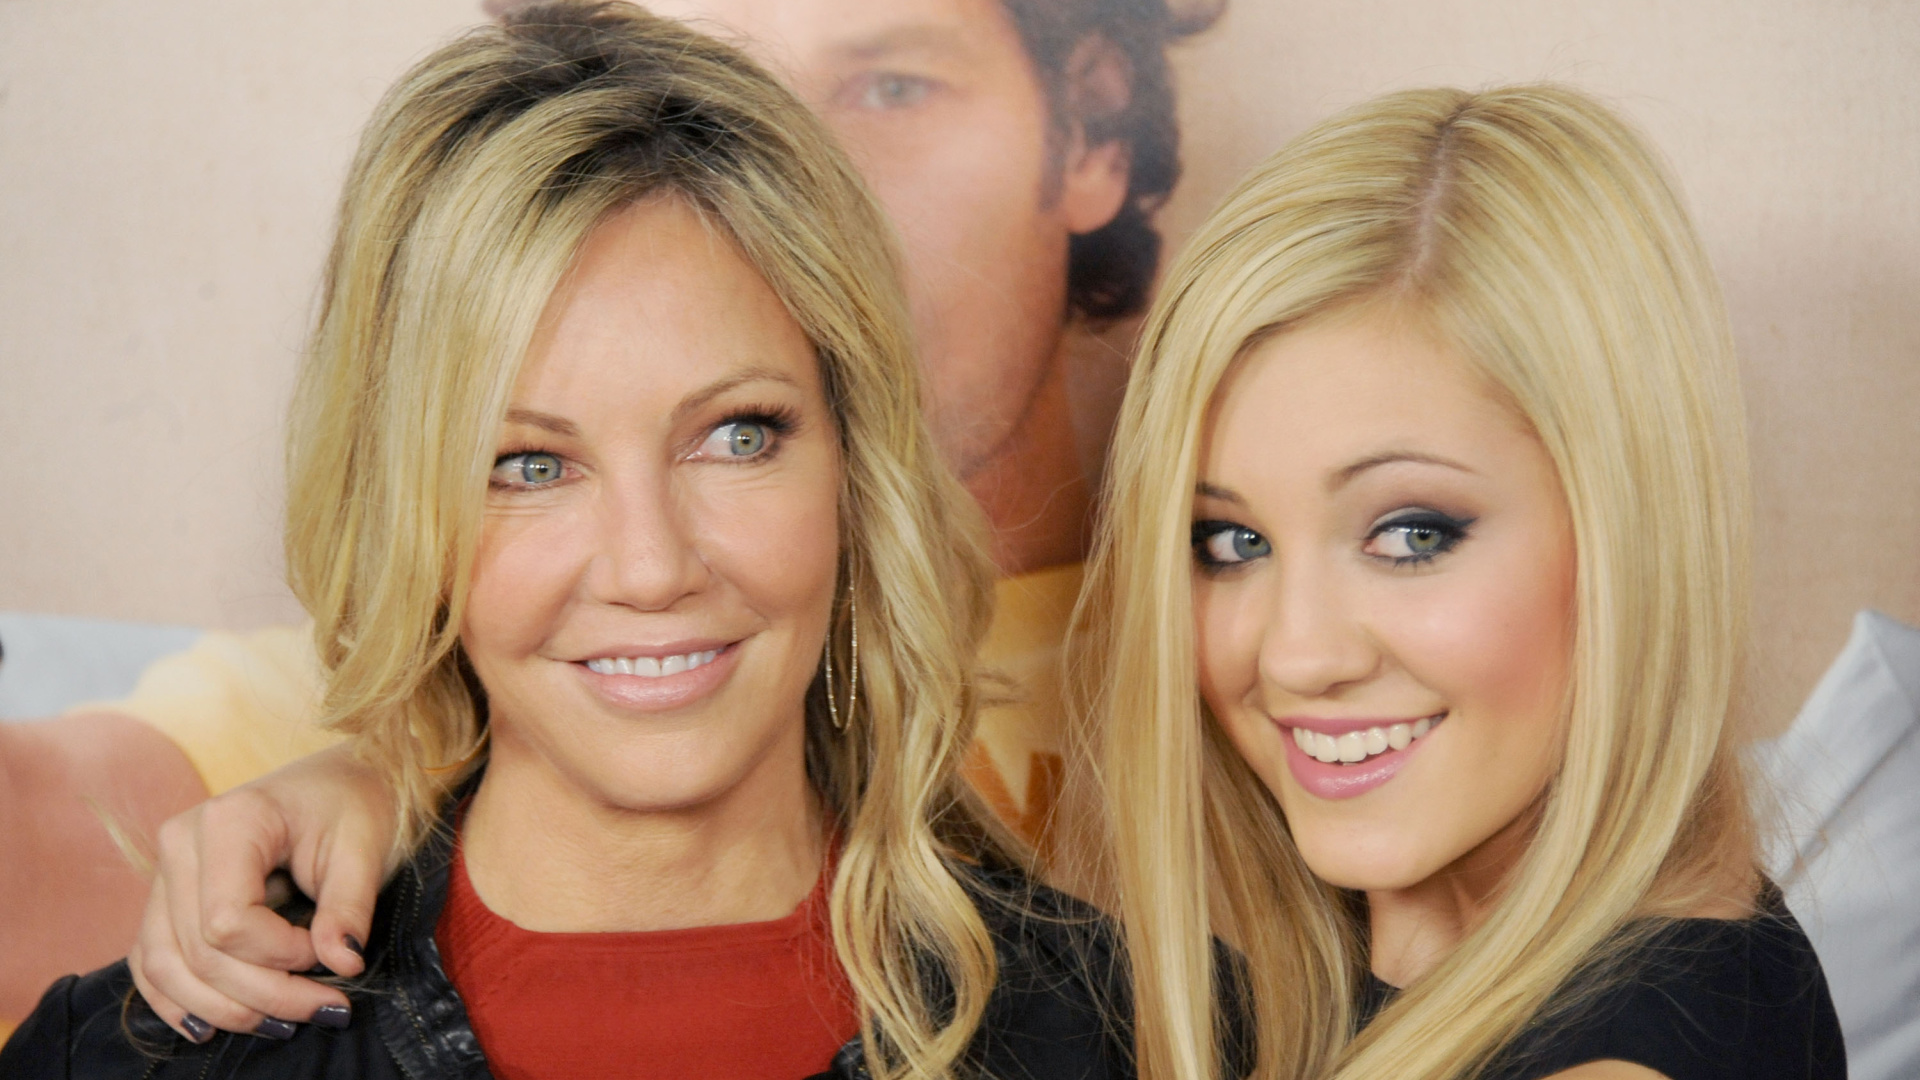 <p class="p1">Ava Sambora has grown up and inherited the blue eyes and blonde hair of her famous mother, one of the most beautiful women of the late 20th century.</p>